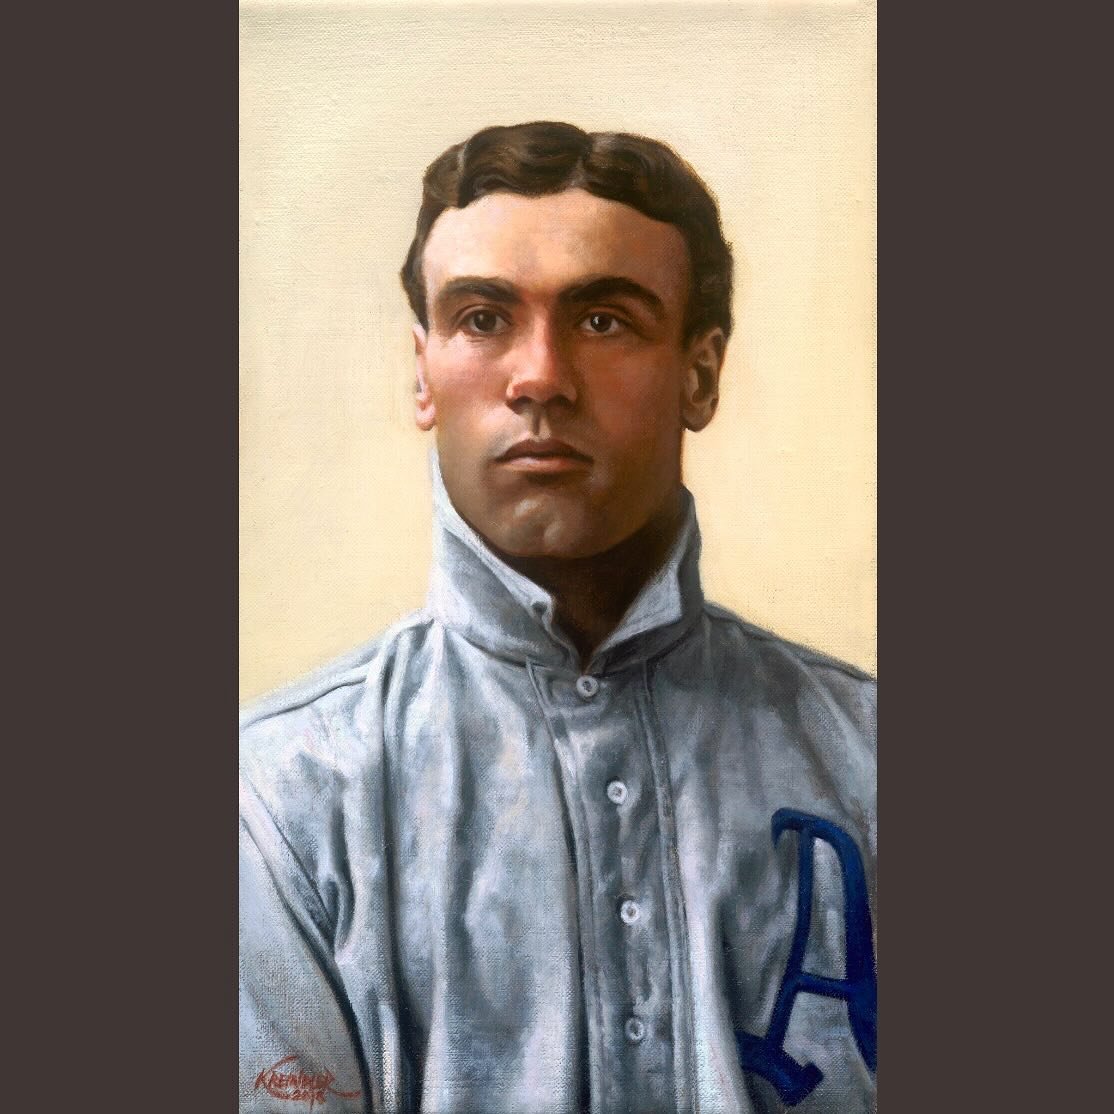 On this day in 1909, Michael &ldquo;Doc&rdquo; Powers passed away at the age of 39. He had become ill during the inaugural game at Shibe Park on April 12, and had a swift decline due to an intussusception. Here&rsquo;s my painting of him with the Ath